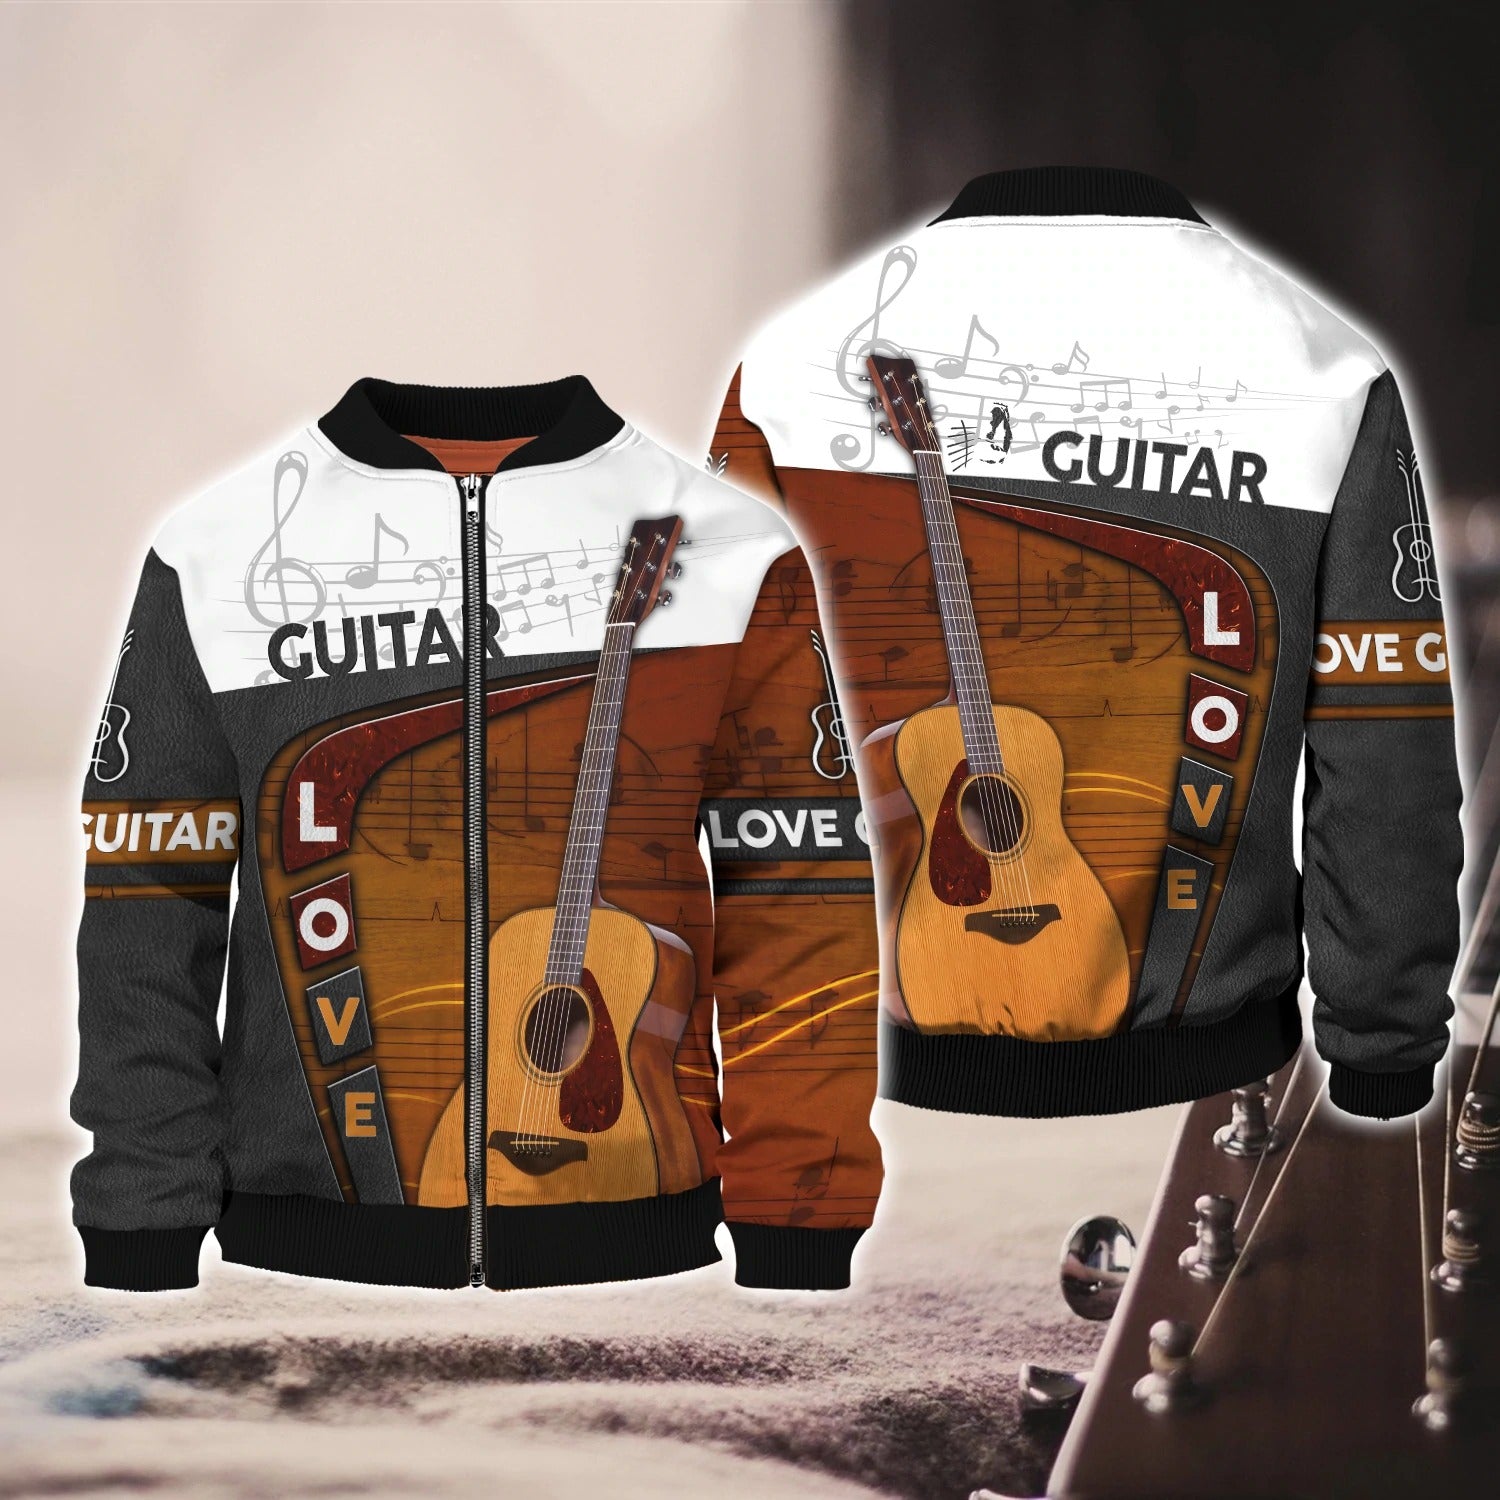 3D All Over Print T Shirt Love Guitar For Guitarist/ Gift For Guitar Lover/ Guitar Sublimation Shirt Hoodie